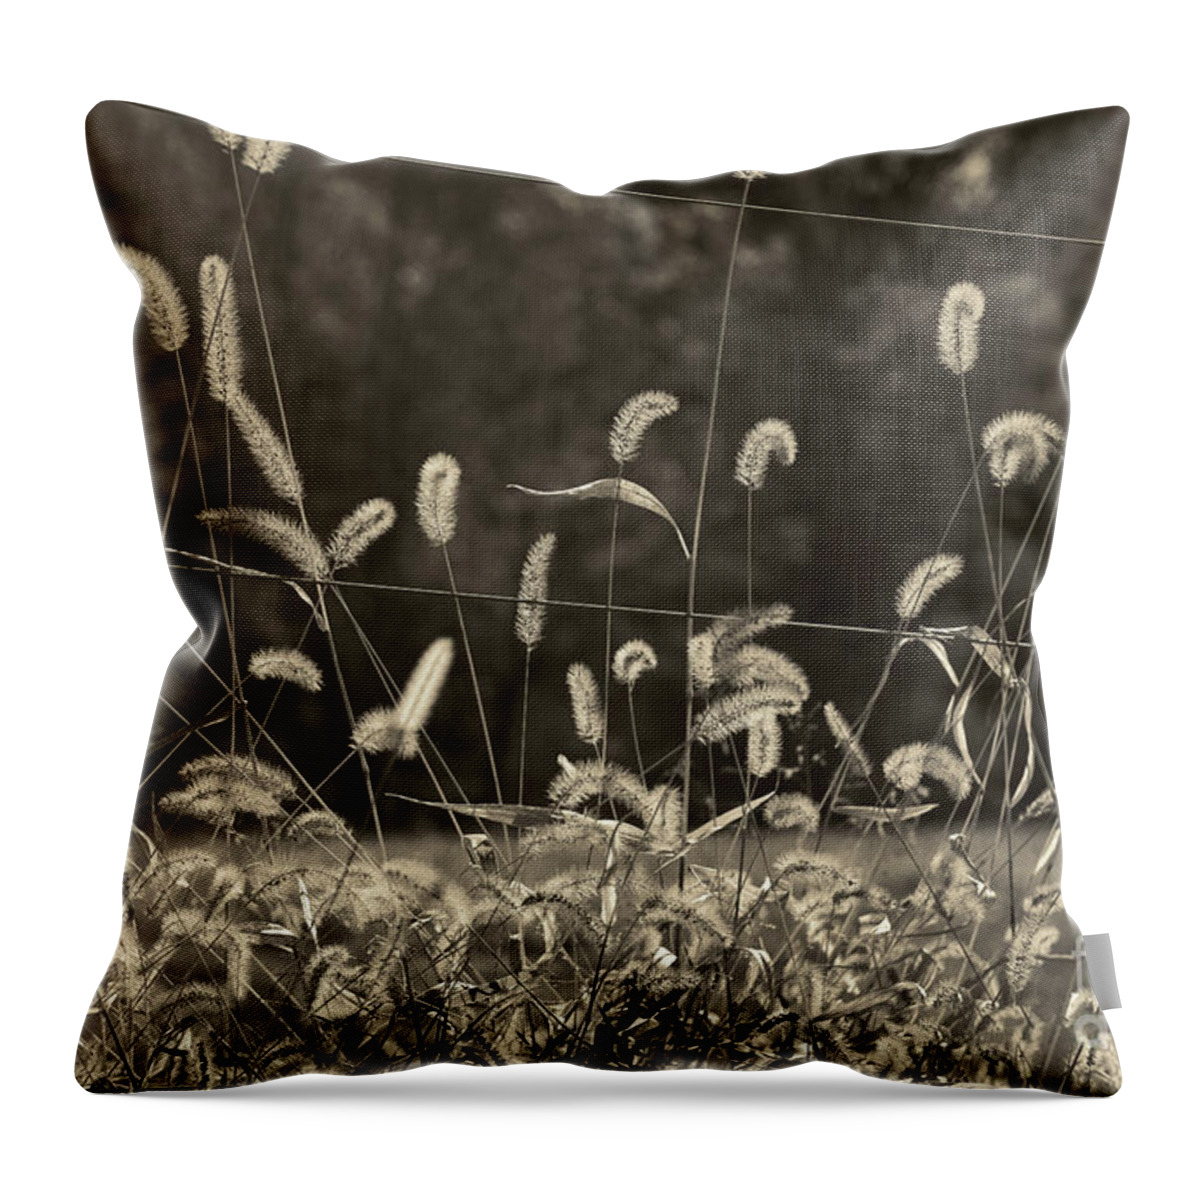 Shrub Throw Pillow featuring the photograph Wispy by Joanne Coyle